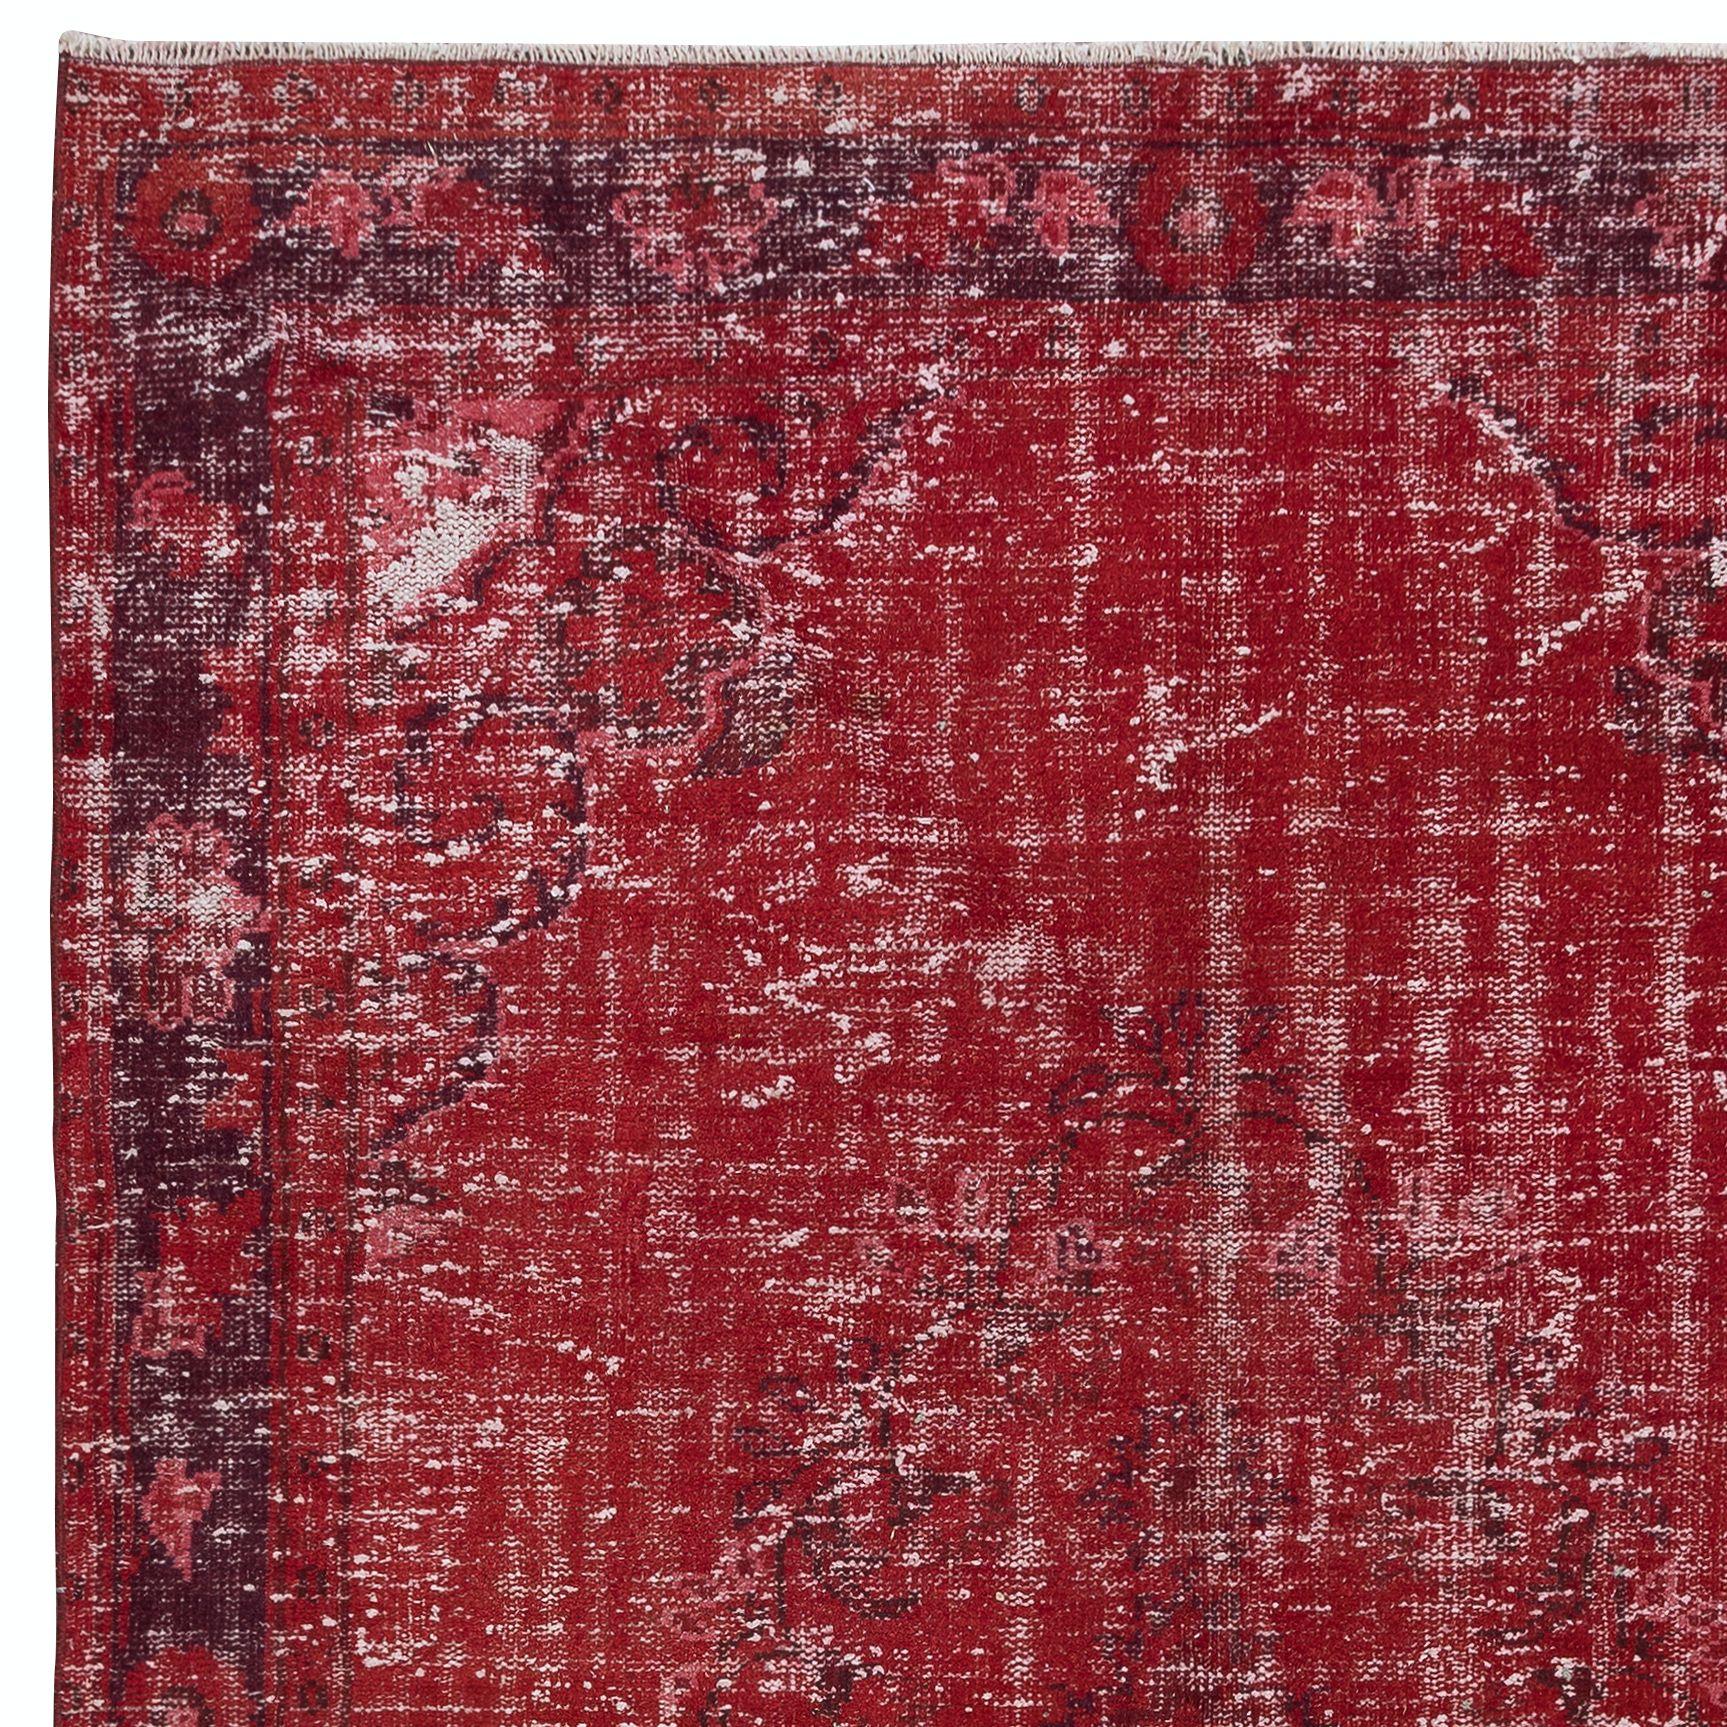 Hand-Woven 6x9.2 Ft Contemporary Handmade Turkish Red Area Rug with Shabby Chic Style For Sale